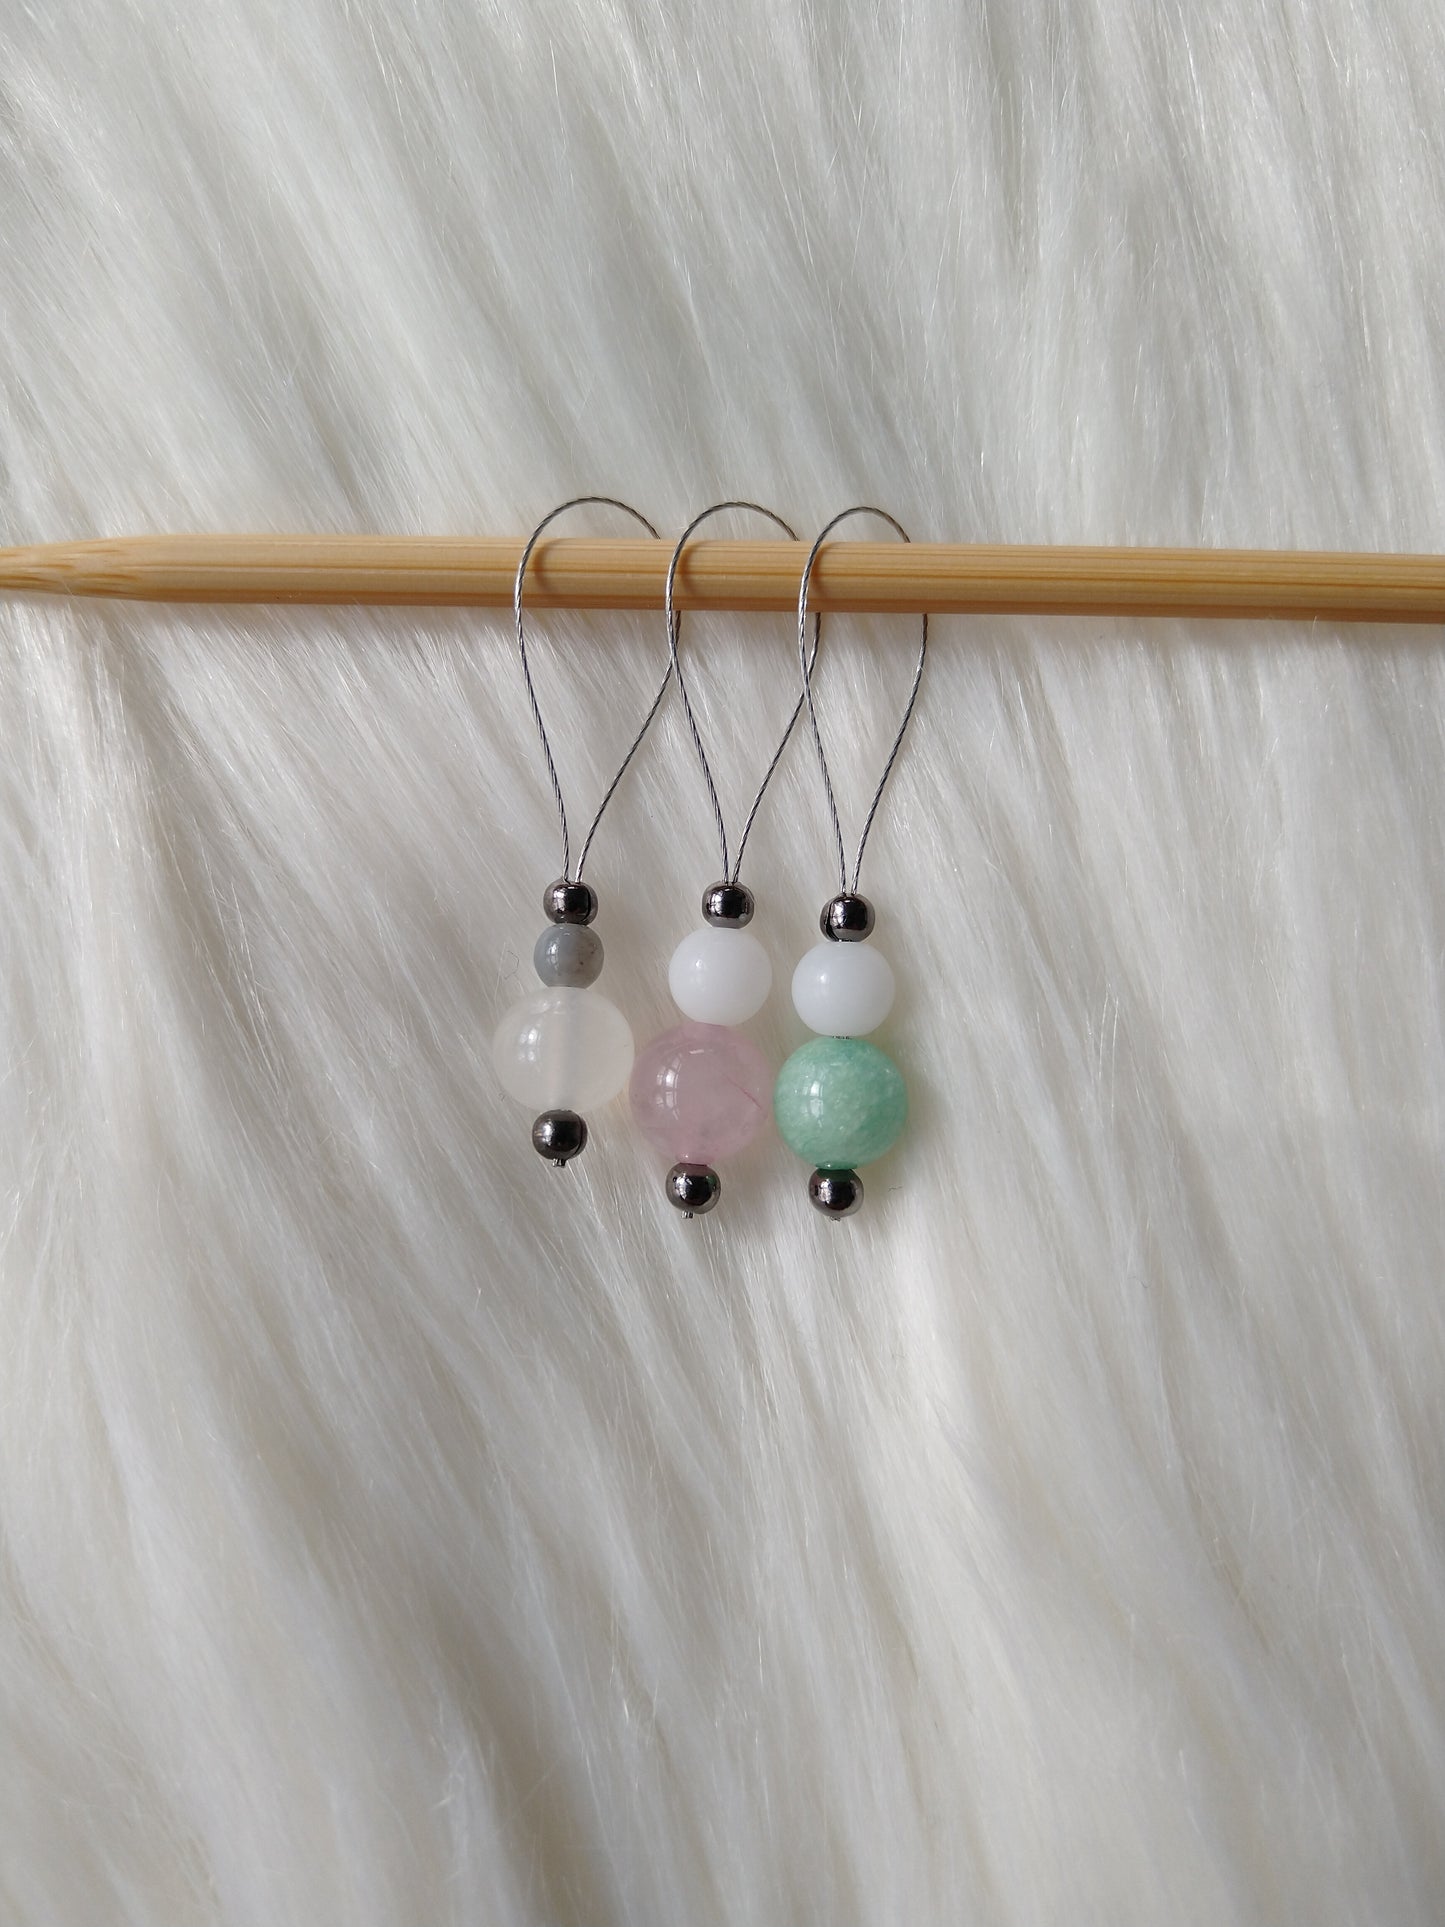 Stitch Markers - spring colored beads, set of 3